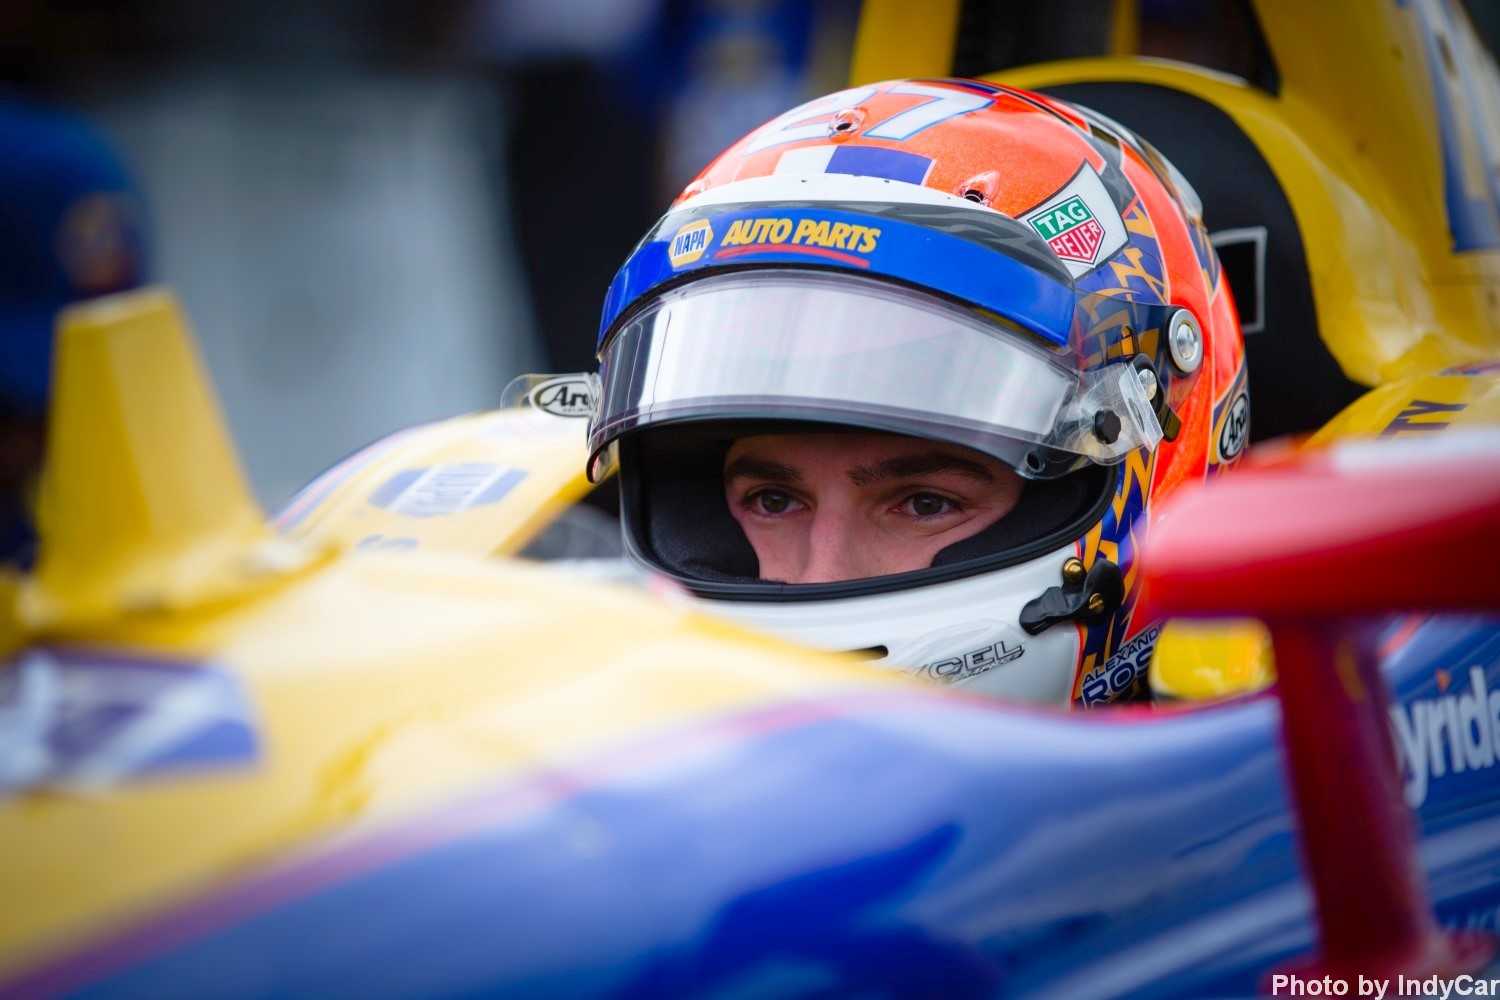 Alexander Rossi - near zero chance at title, doesn't drive for Team Penske